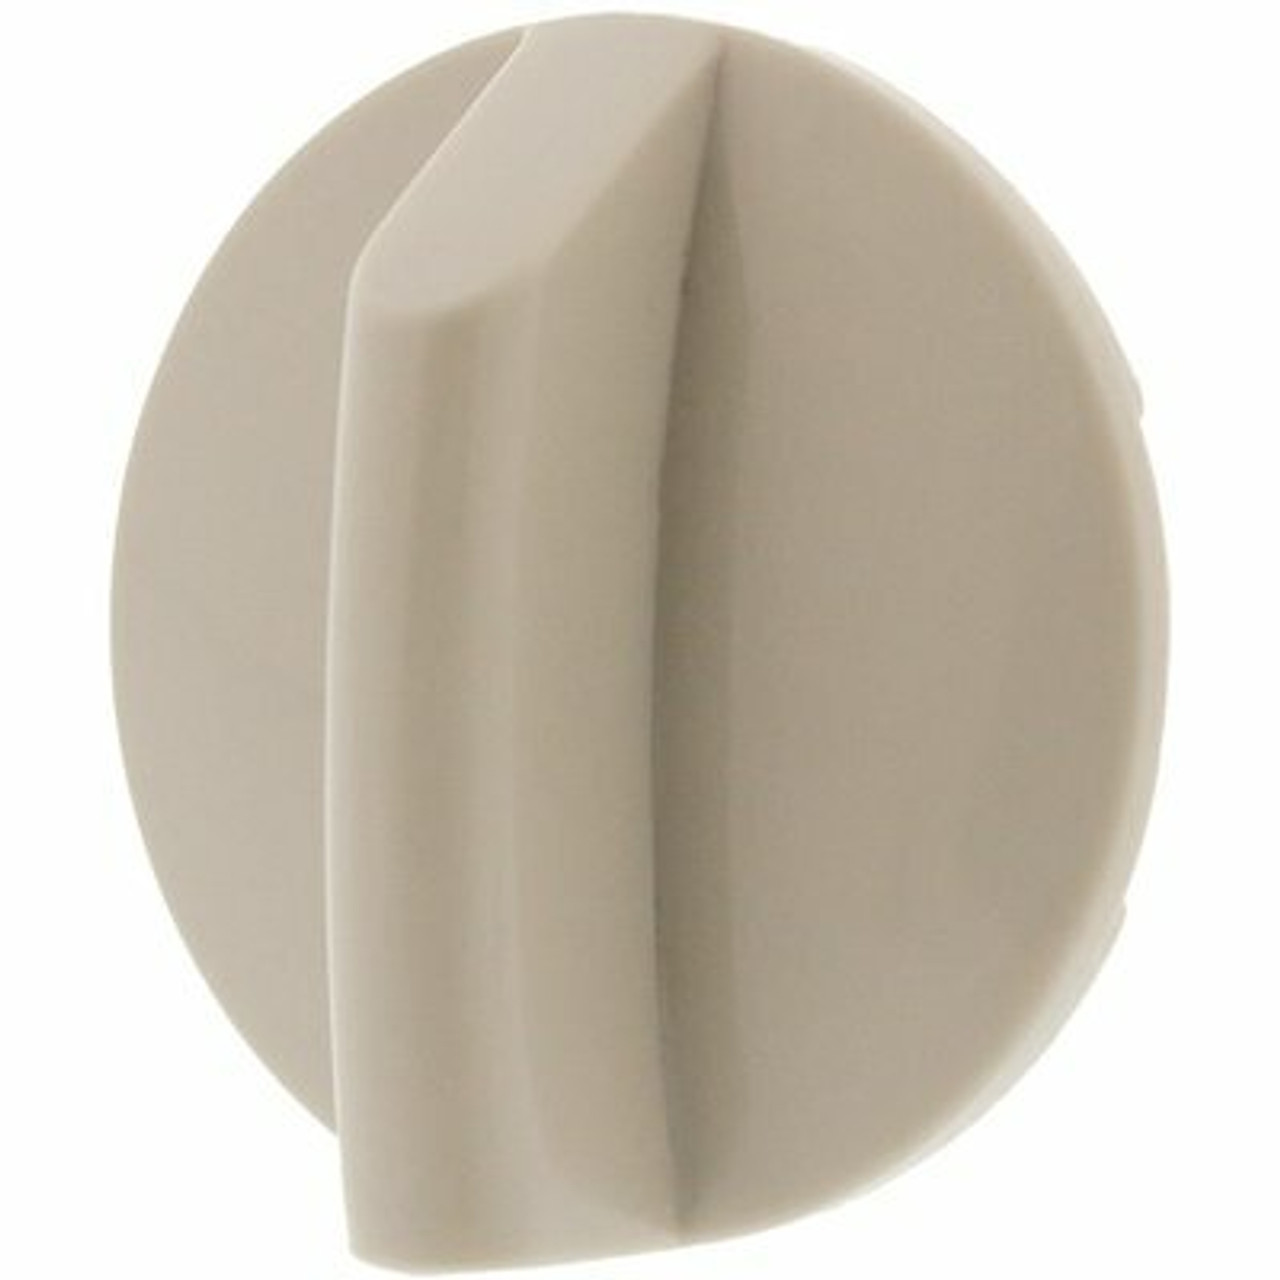 Exact Replacement Parts Control Knob Fits Ge